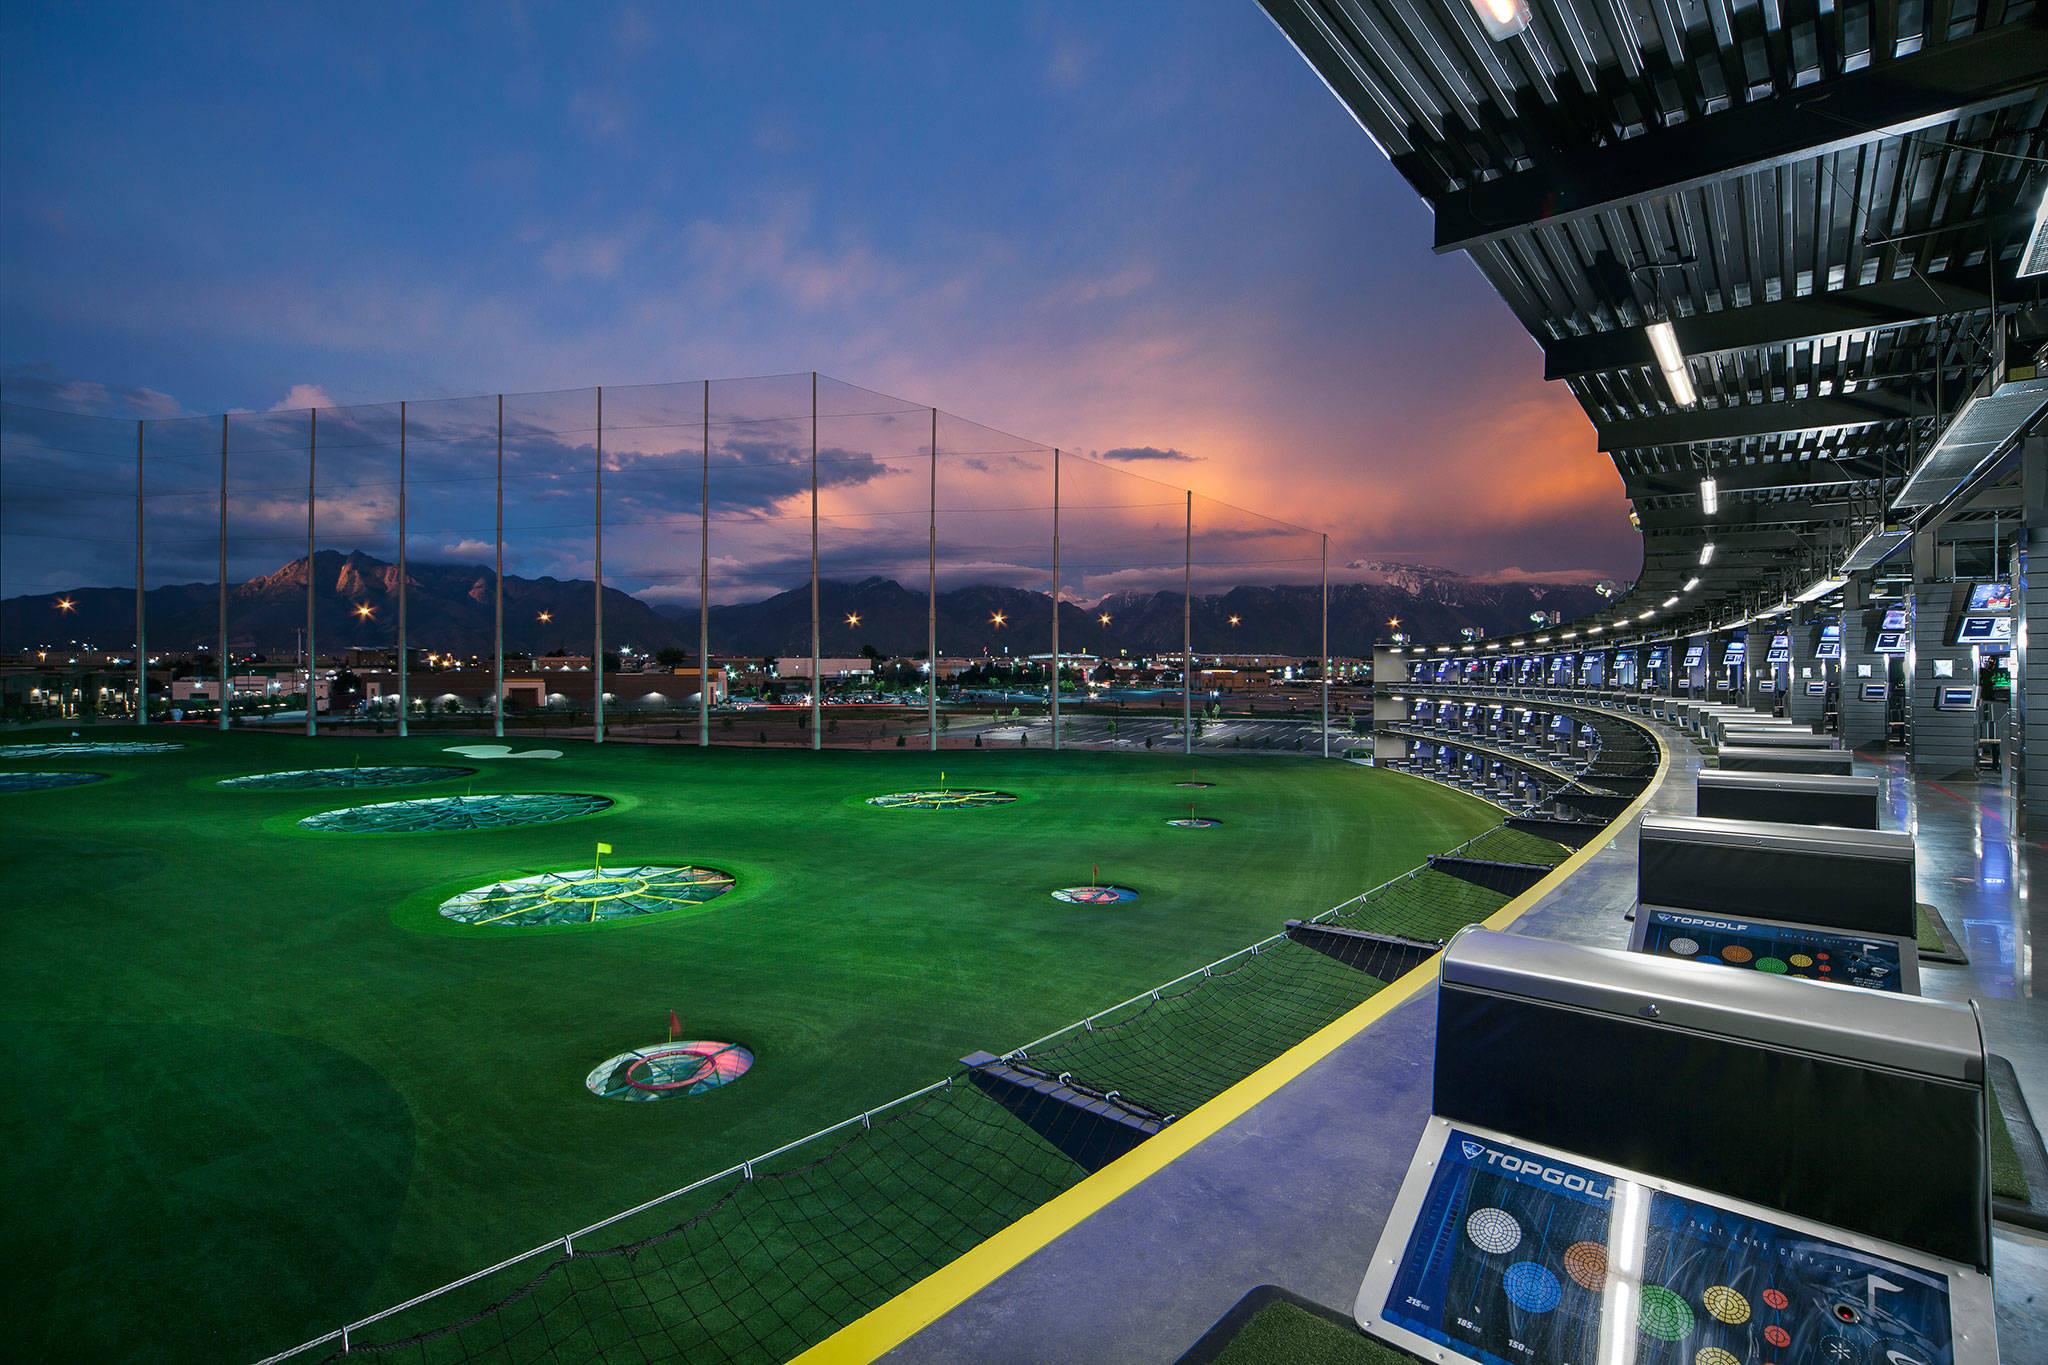 2021 FCA Golf Pairings Party at Top Golf